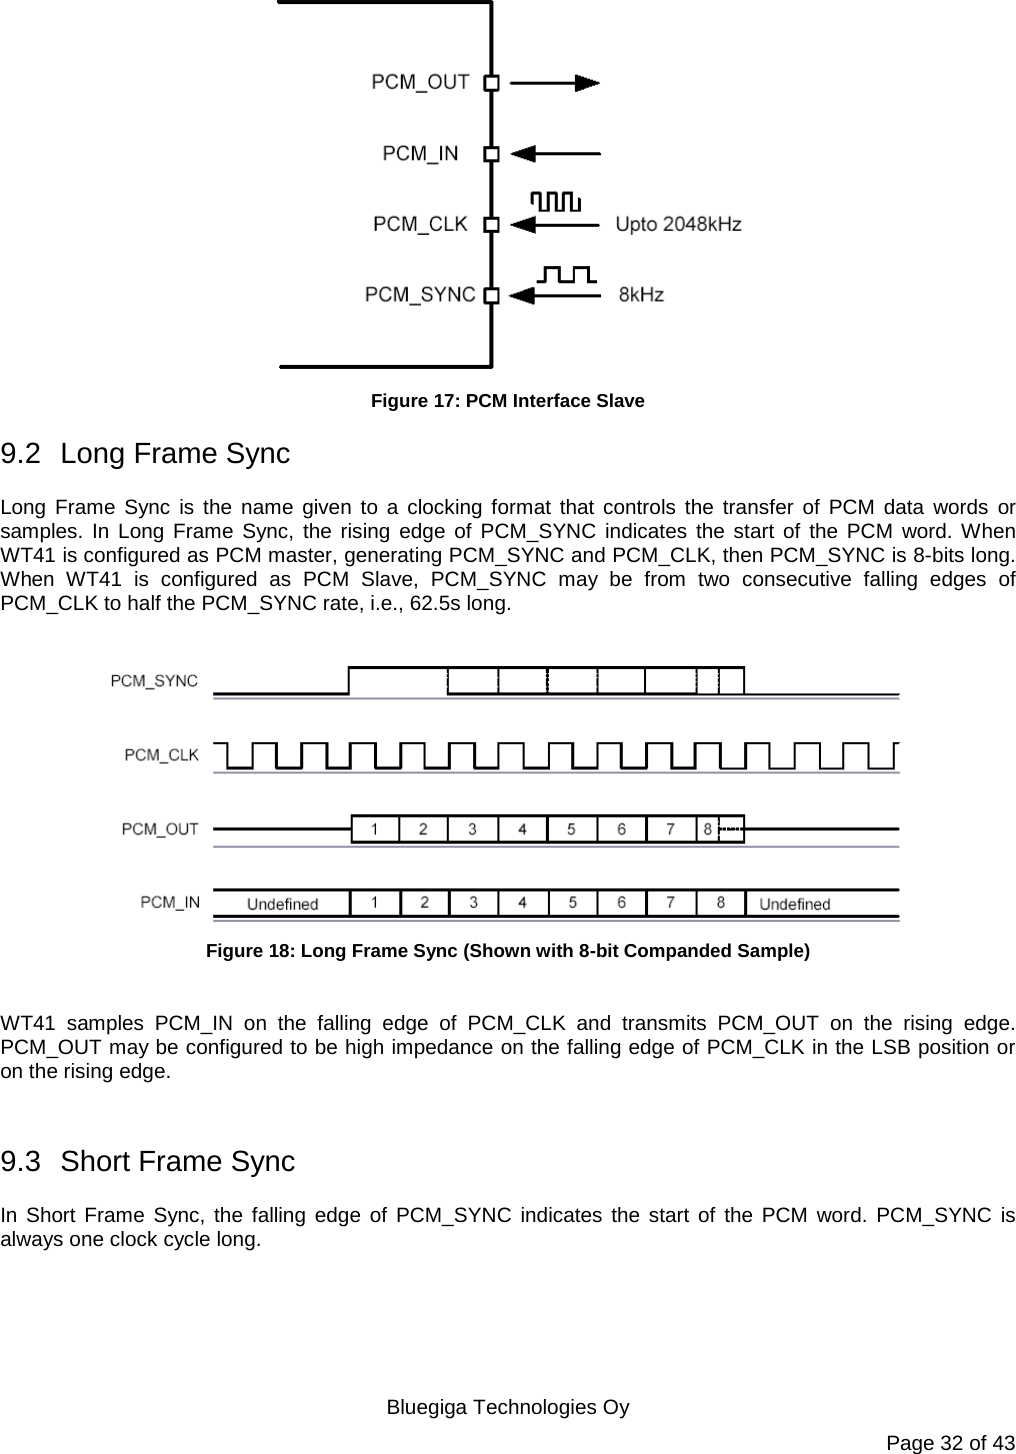   Bluegiga Technologies Oy Page 32 of 43  Figure 17: PCM Interface Slave 9.2 Long Frame Sync Long Frame Sync is the name given to a clocking format that controls the transfer of PCM data words or samples. In Long Frame Sync, the rising edge of PCM_SYNC indicates the start of the PCM word. When WT41 is configured as PCM master, generating PCM_SYNC and PCM_CLK, then PCM_SYNC is 8-bits long. When WT41 is configured as PCM Slave, PCM_SYNC may be from two consecutive falling edges of PCM_CLK to half the PCM_SYNC rate, i.e., 62.5s long.   Figure 18: Long Frame Sync (Shown with 8-bit Companded Sample)  WT41 samples PCM_IN on the falling edge of PCM_CLK and transmits PCM_OUT on the rising edge. PCM_OUT may be configured to be high impedance on the falling edge of PCM_CLK in the LSB position or on the rising edge.  9.3 Short Frame Sync In Short Frame Sync, the falling edge of PCM_SYNC indicates the start of the PCM word. PCM_SYNC is always one clock cycle long. 